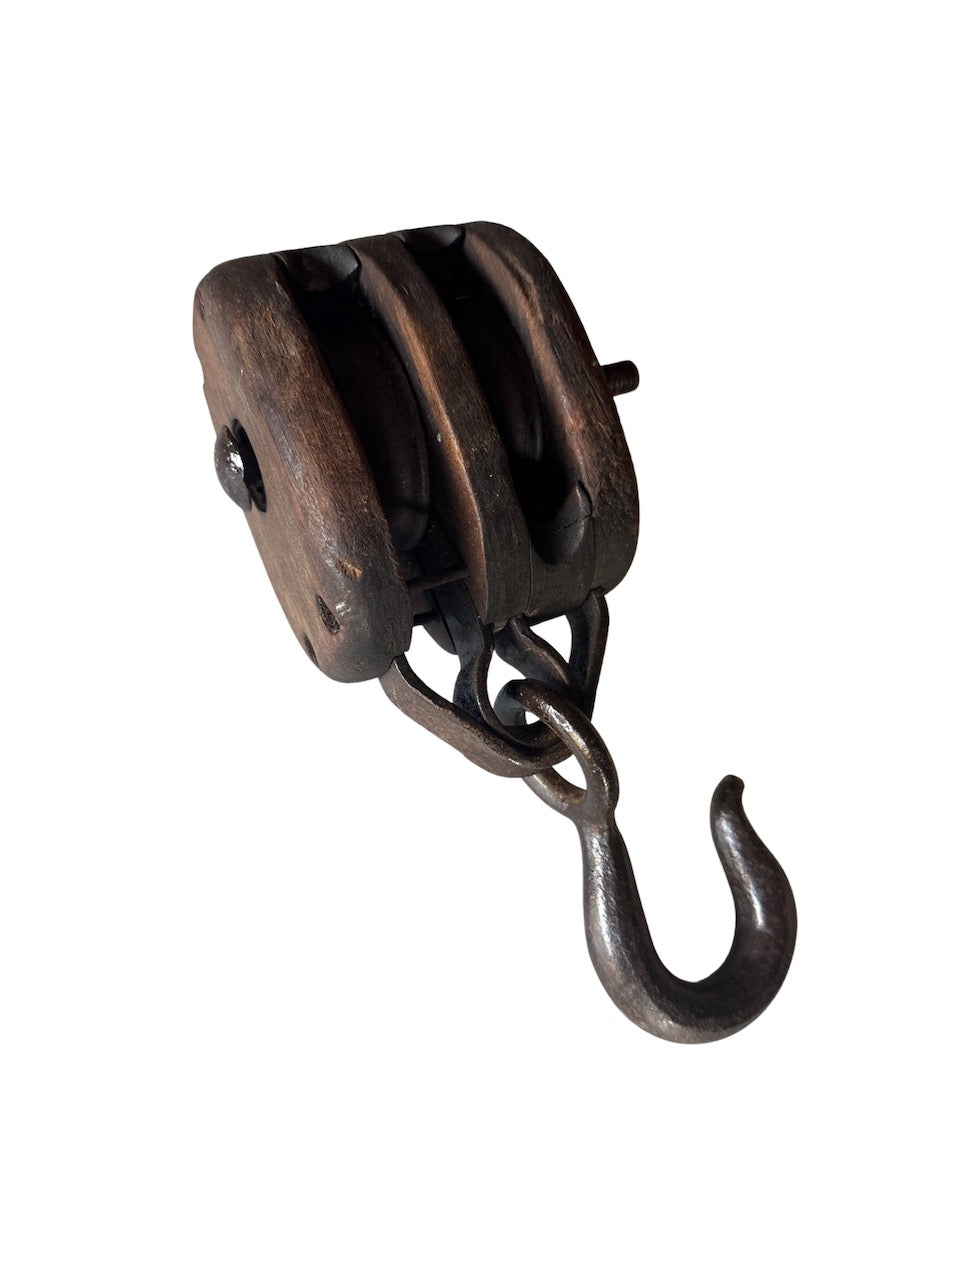 Antique double wood pulley